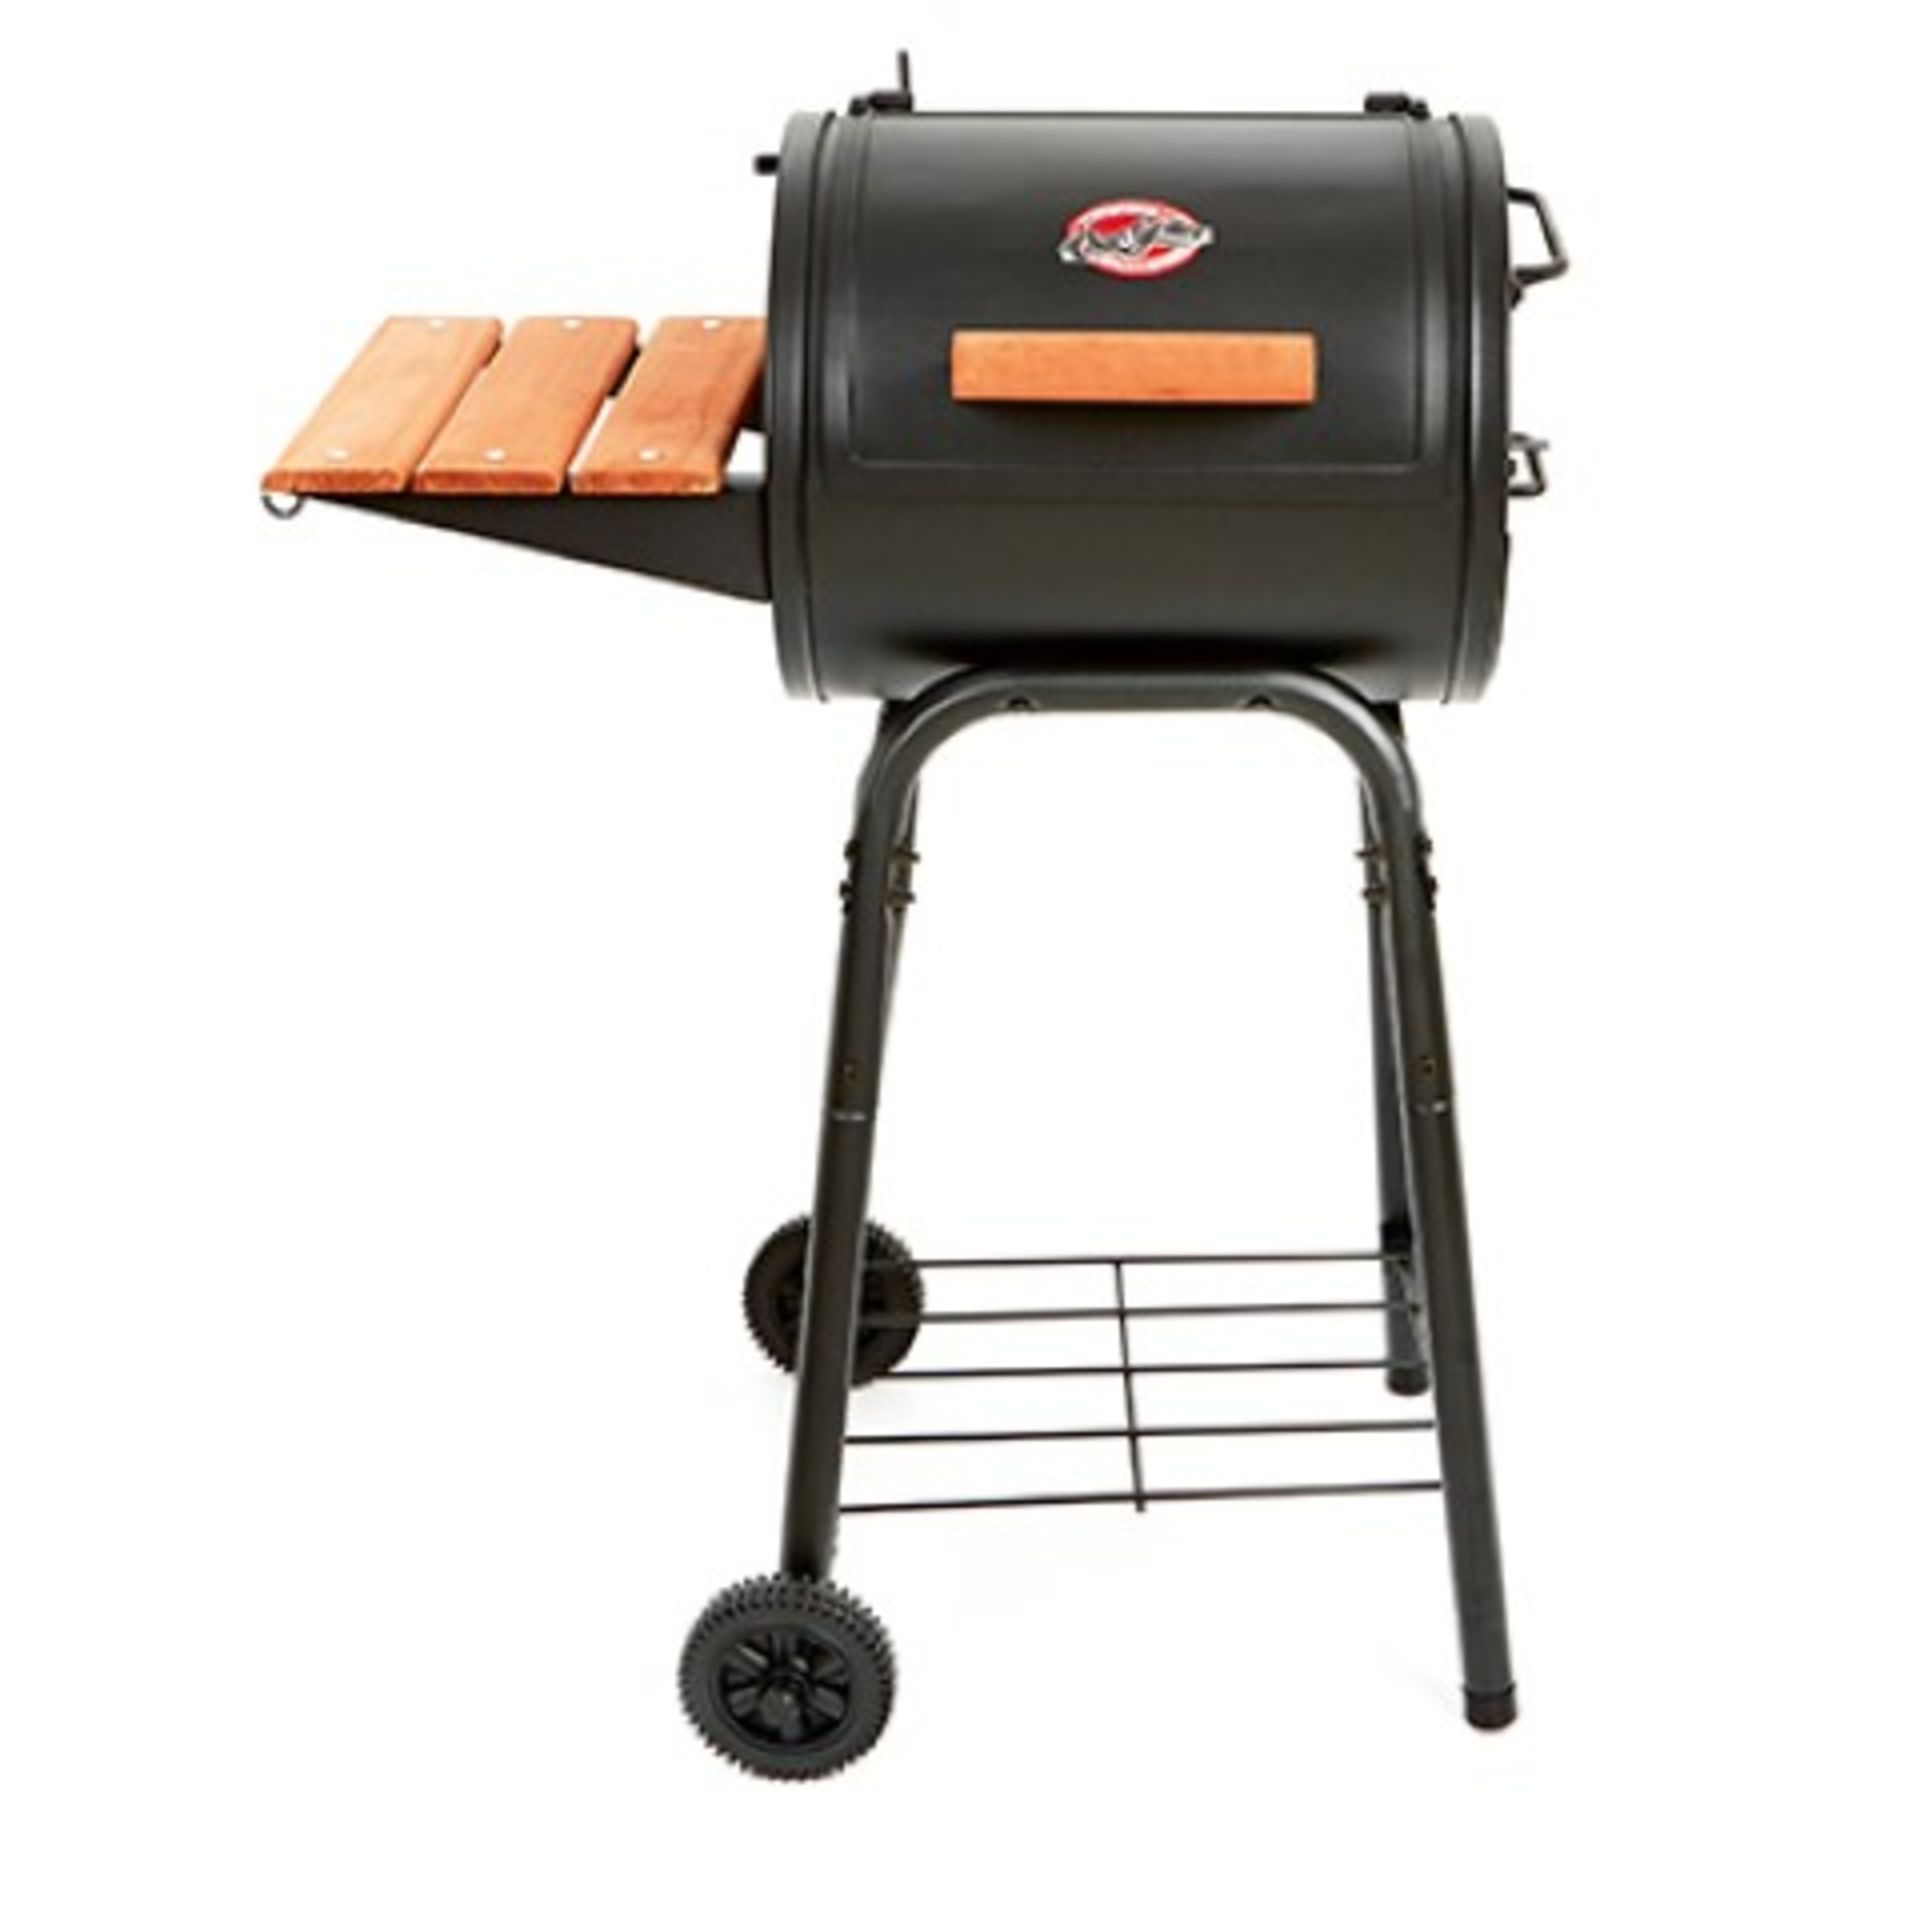 BRAND NEW* MEDIUM GRILL PATIO PRO CHARCOAL STANDING BBQ - Image 2 of 2